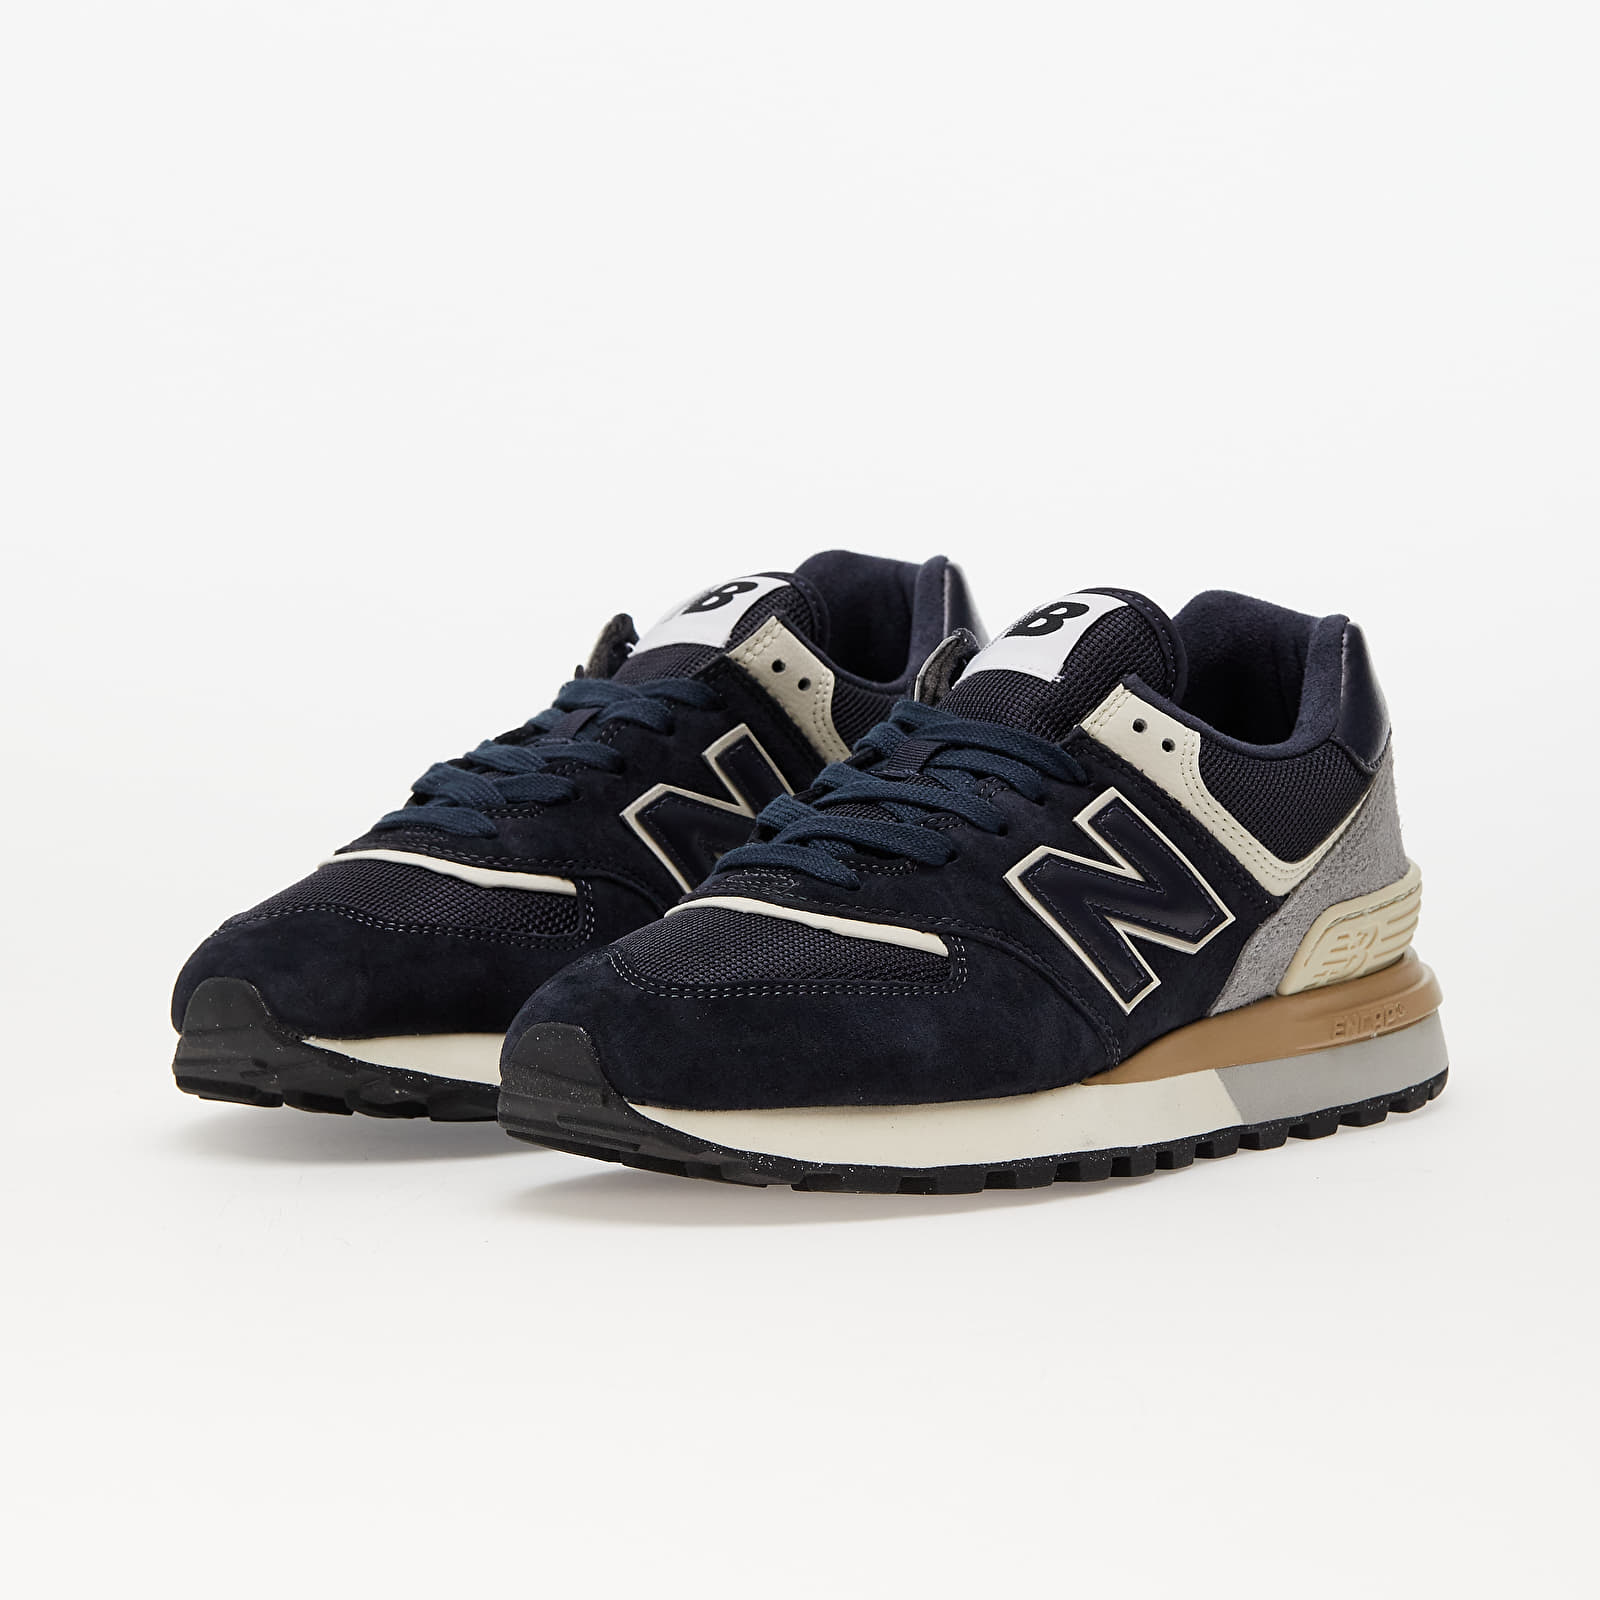 Men's sneakers and shoes New Balance 574 Blue Navy